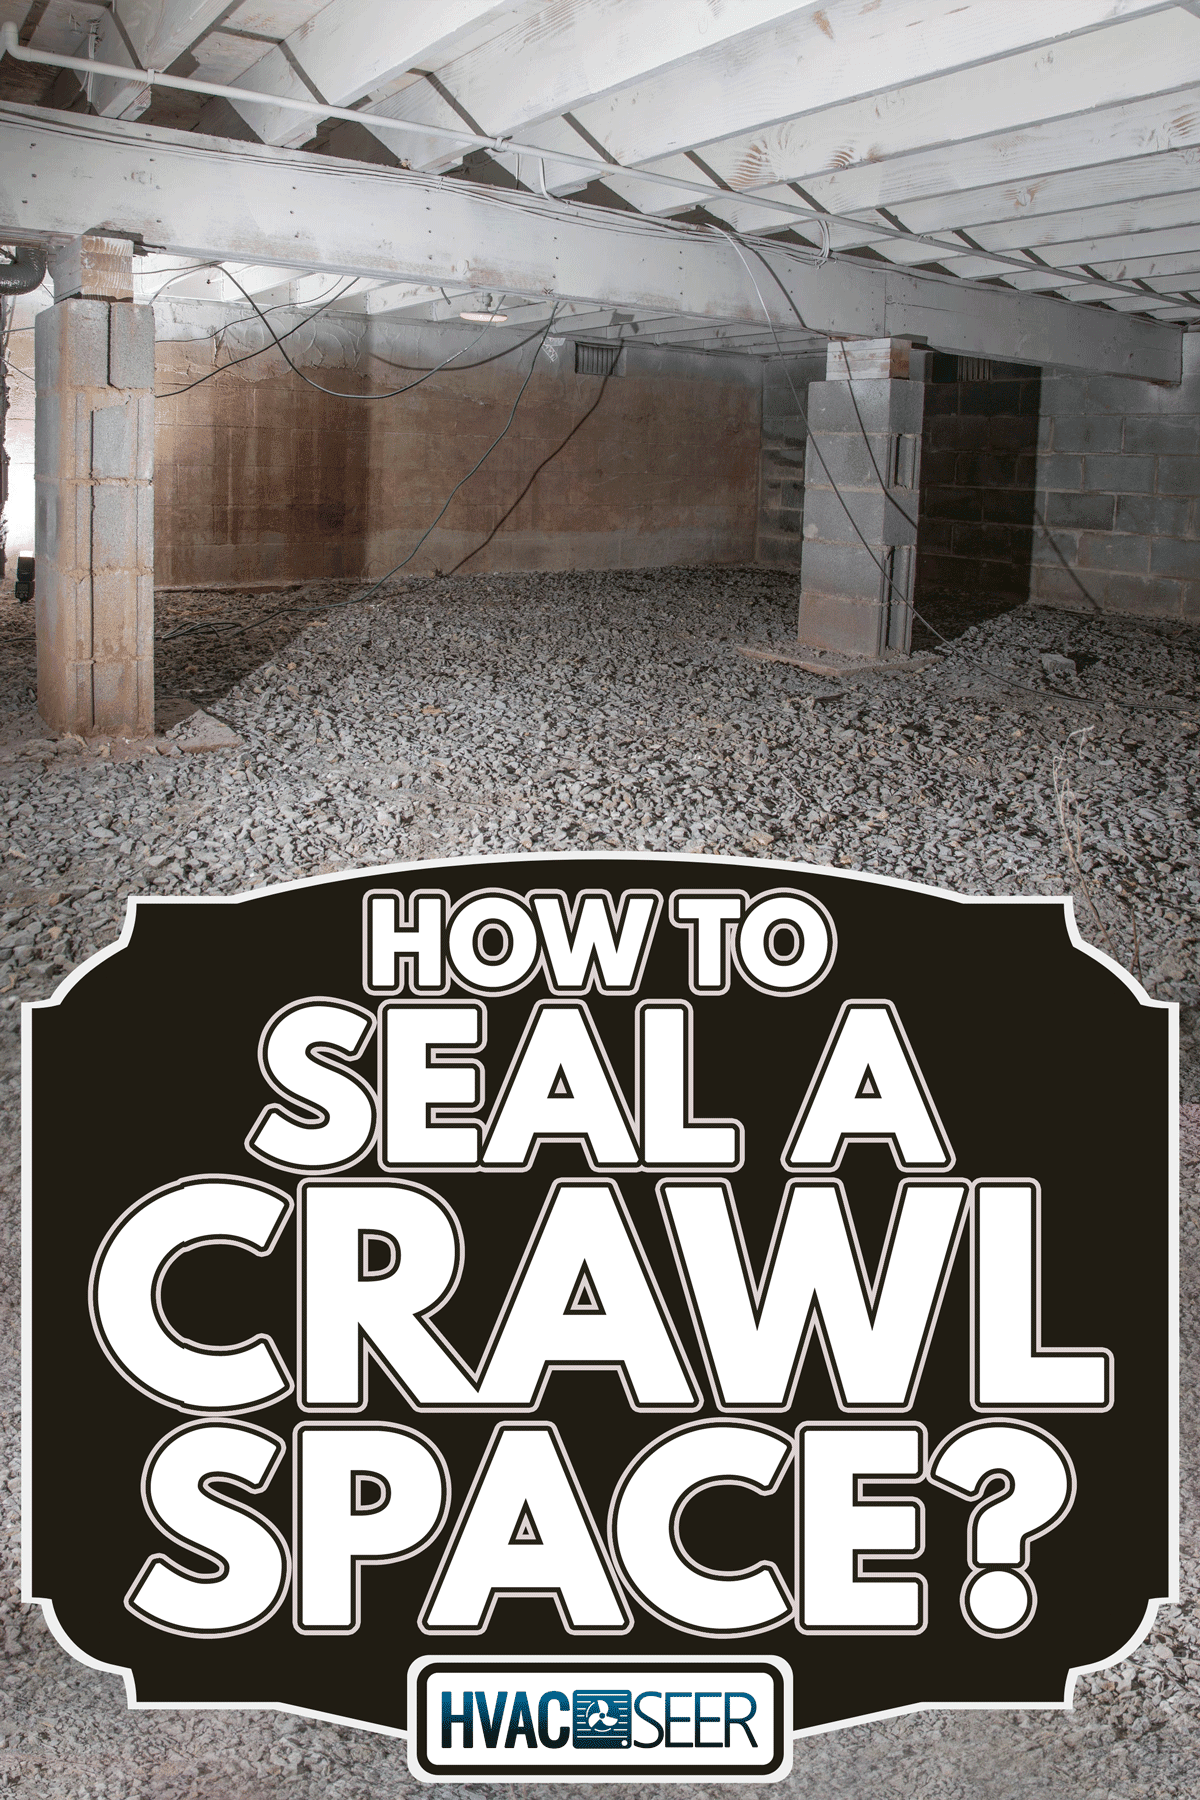 A basement crawl space sans insulation, How To Seal A Crawl Space?